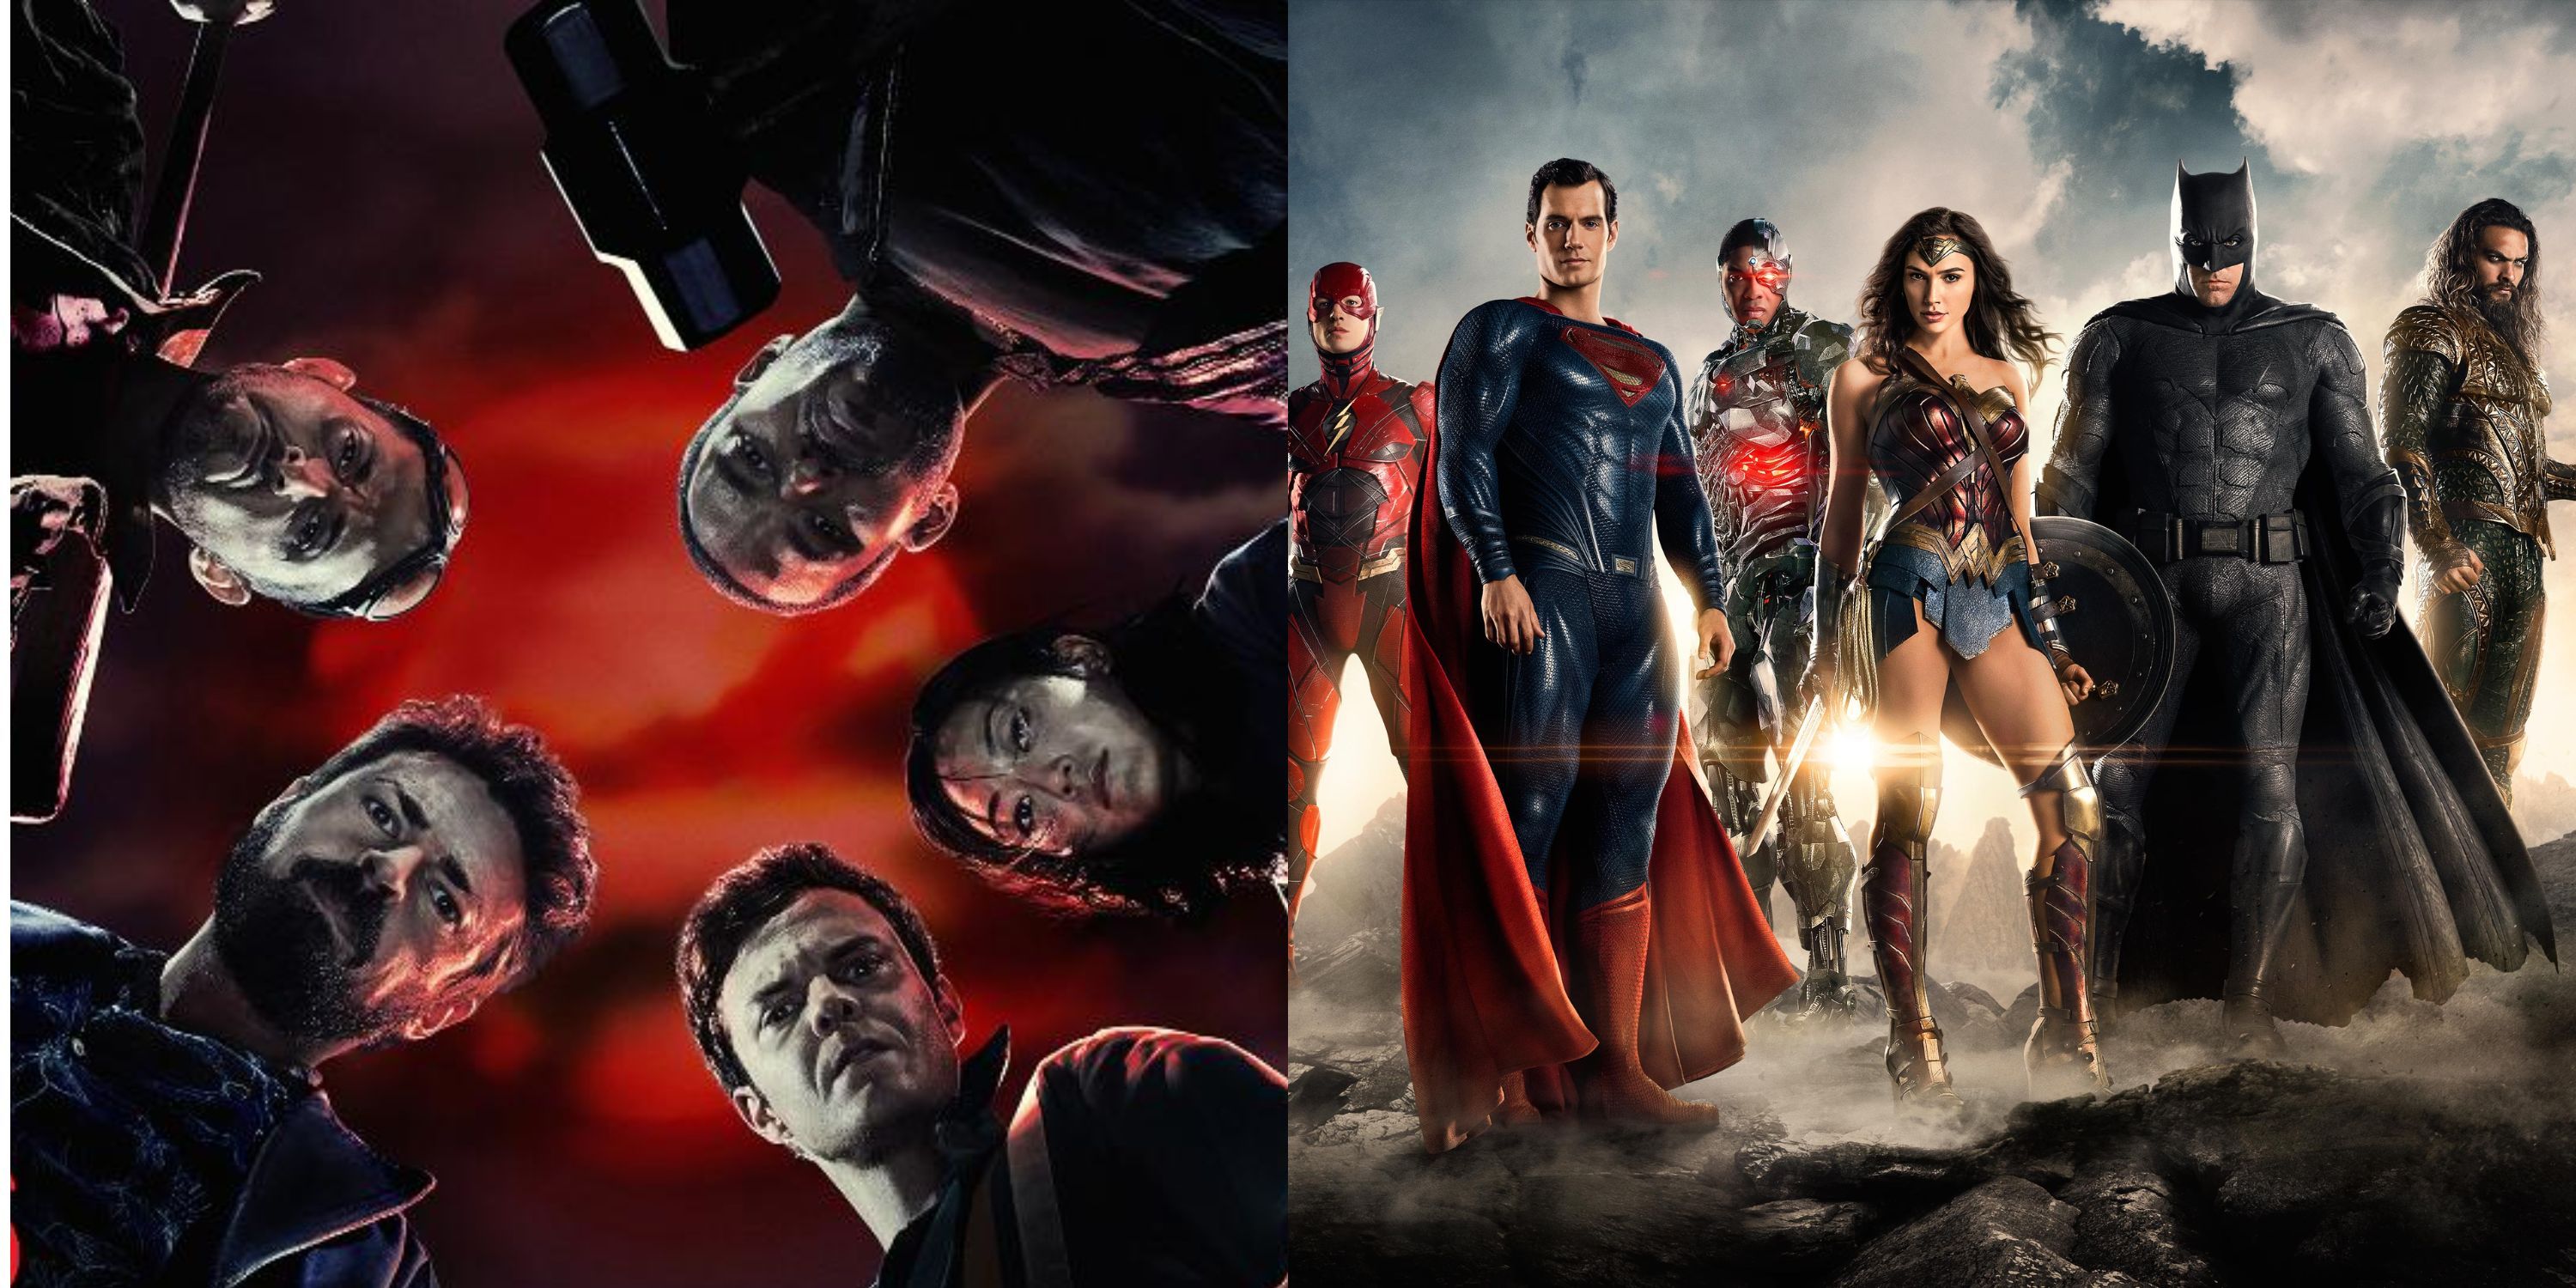 A split image of The Boys and the Justice League.